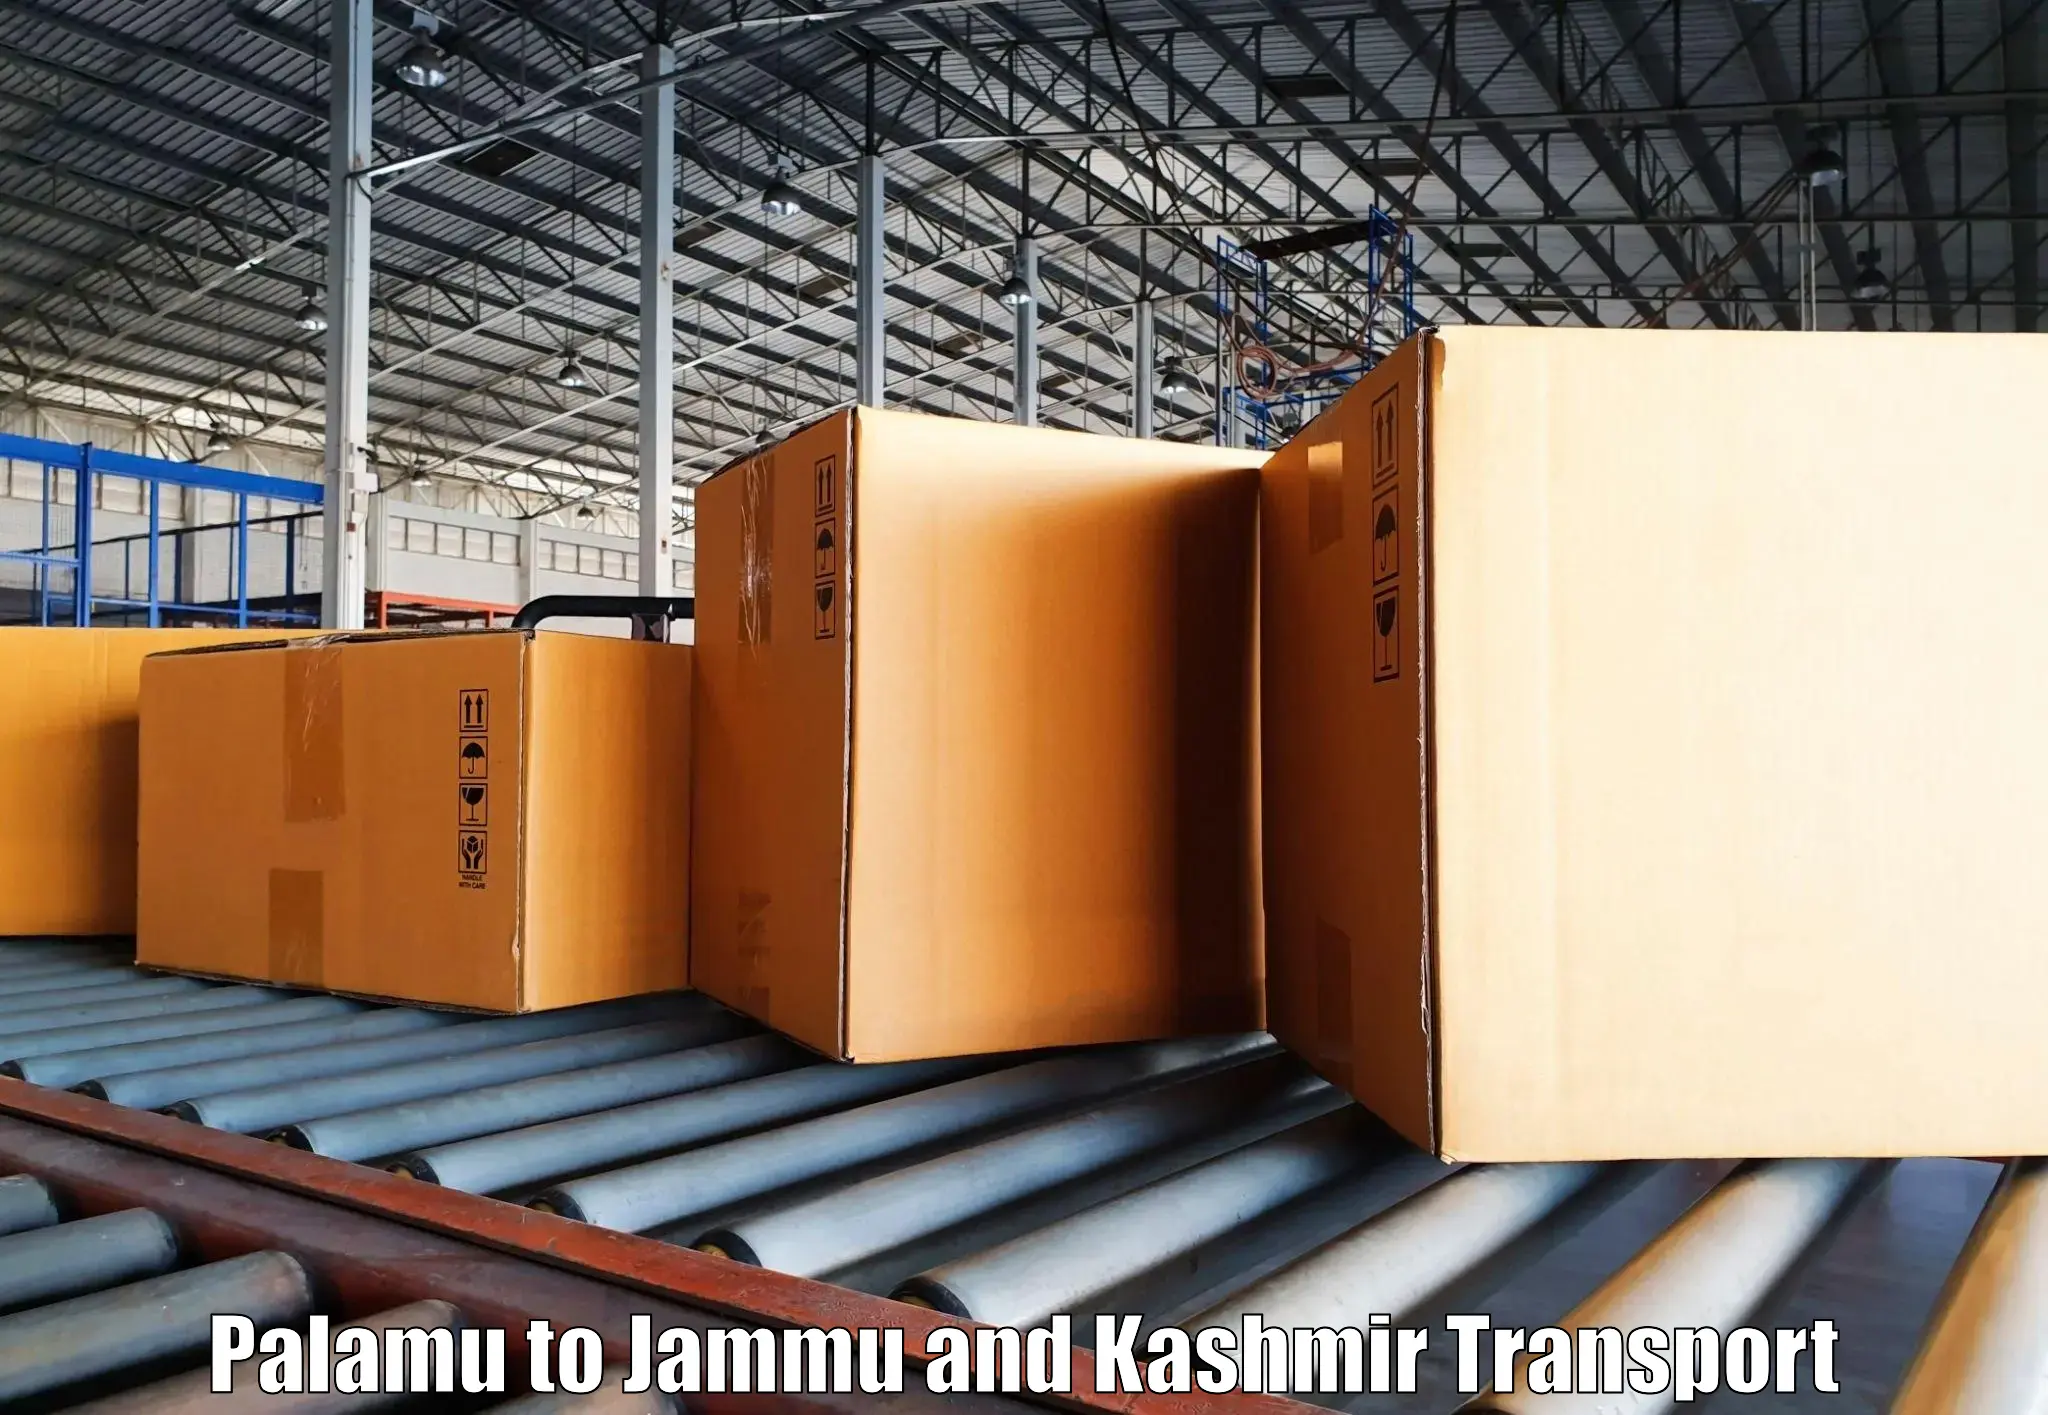 Transport bike from one state to another Palamu to Jammu and Kashmir